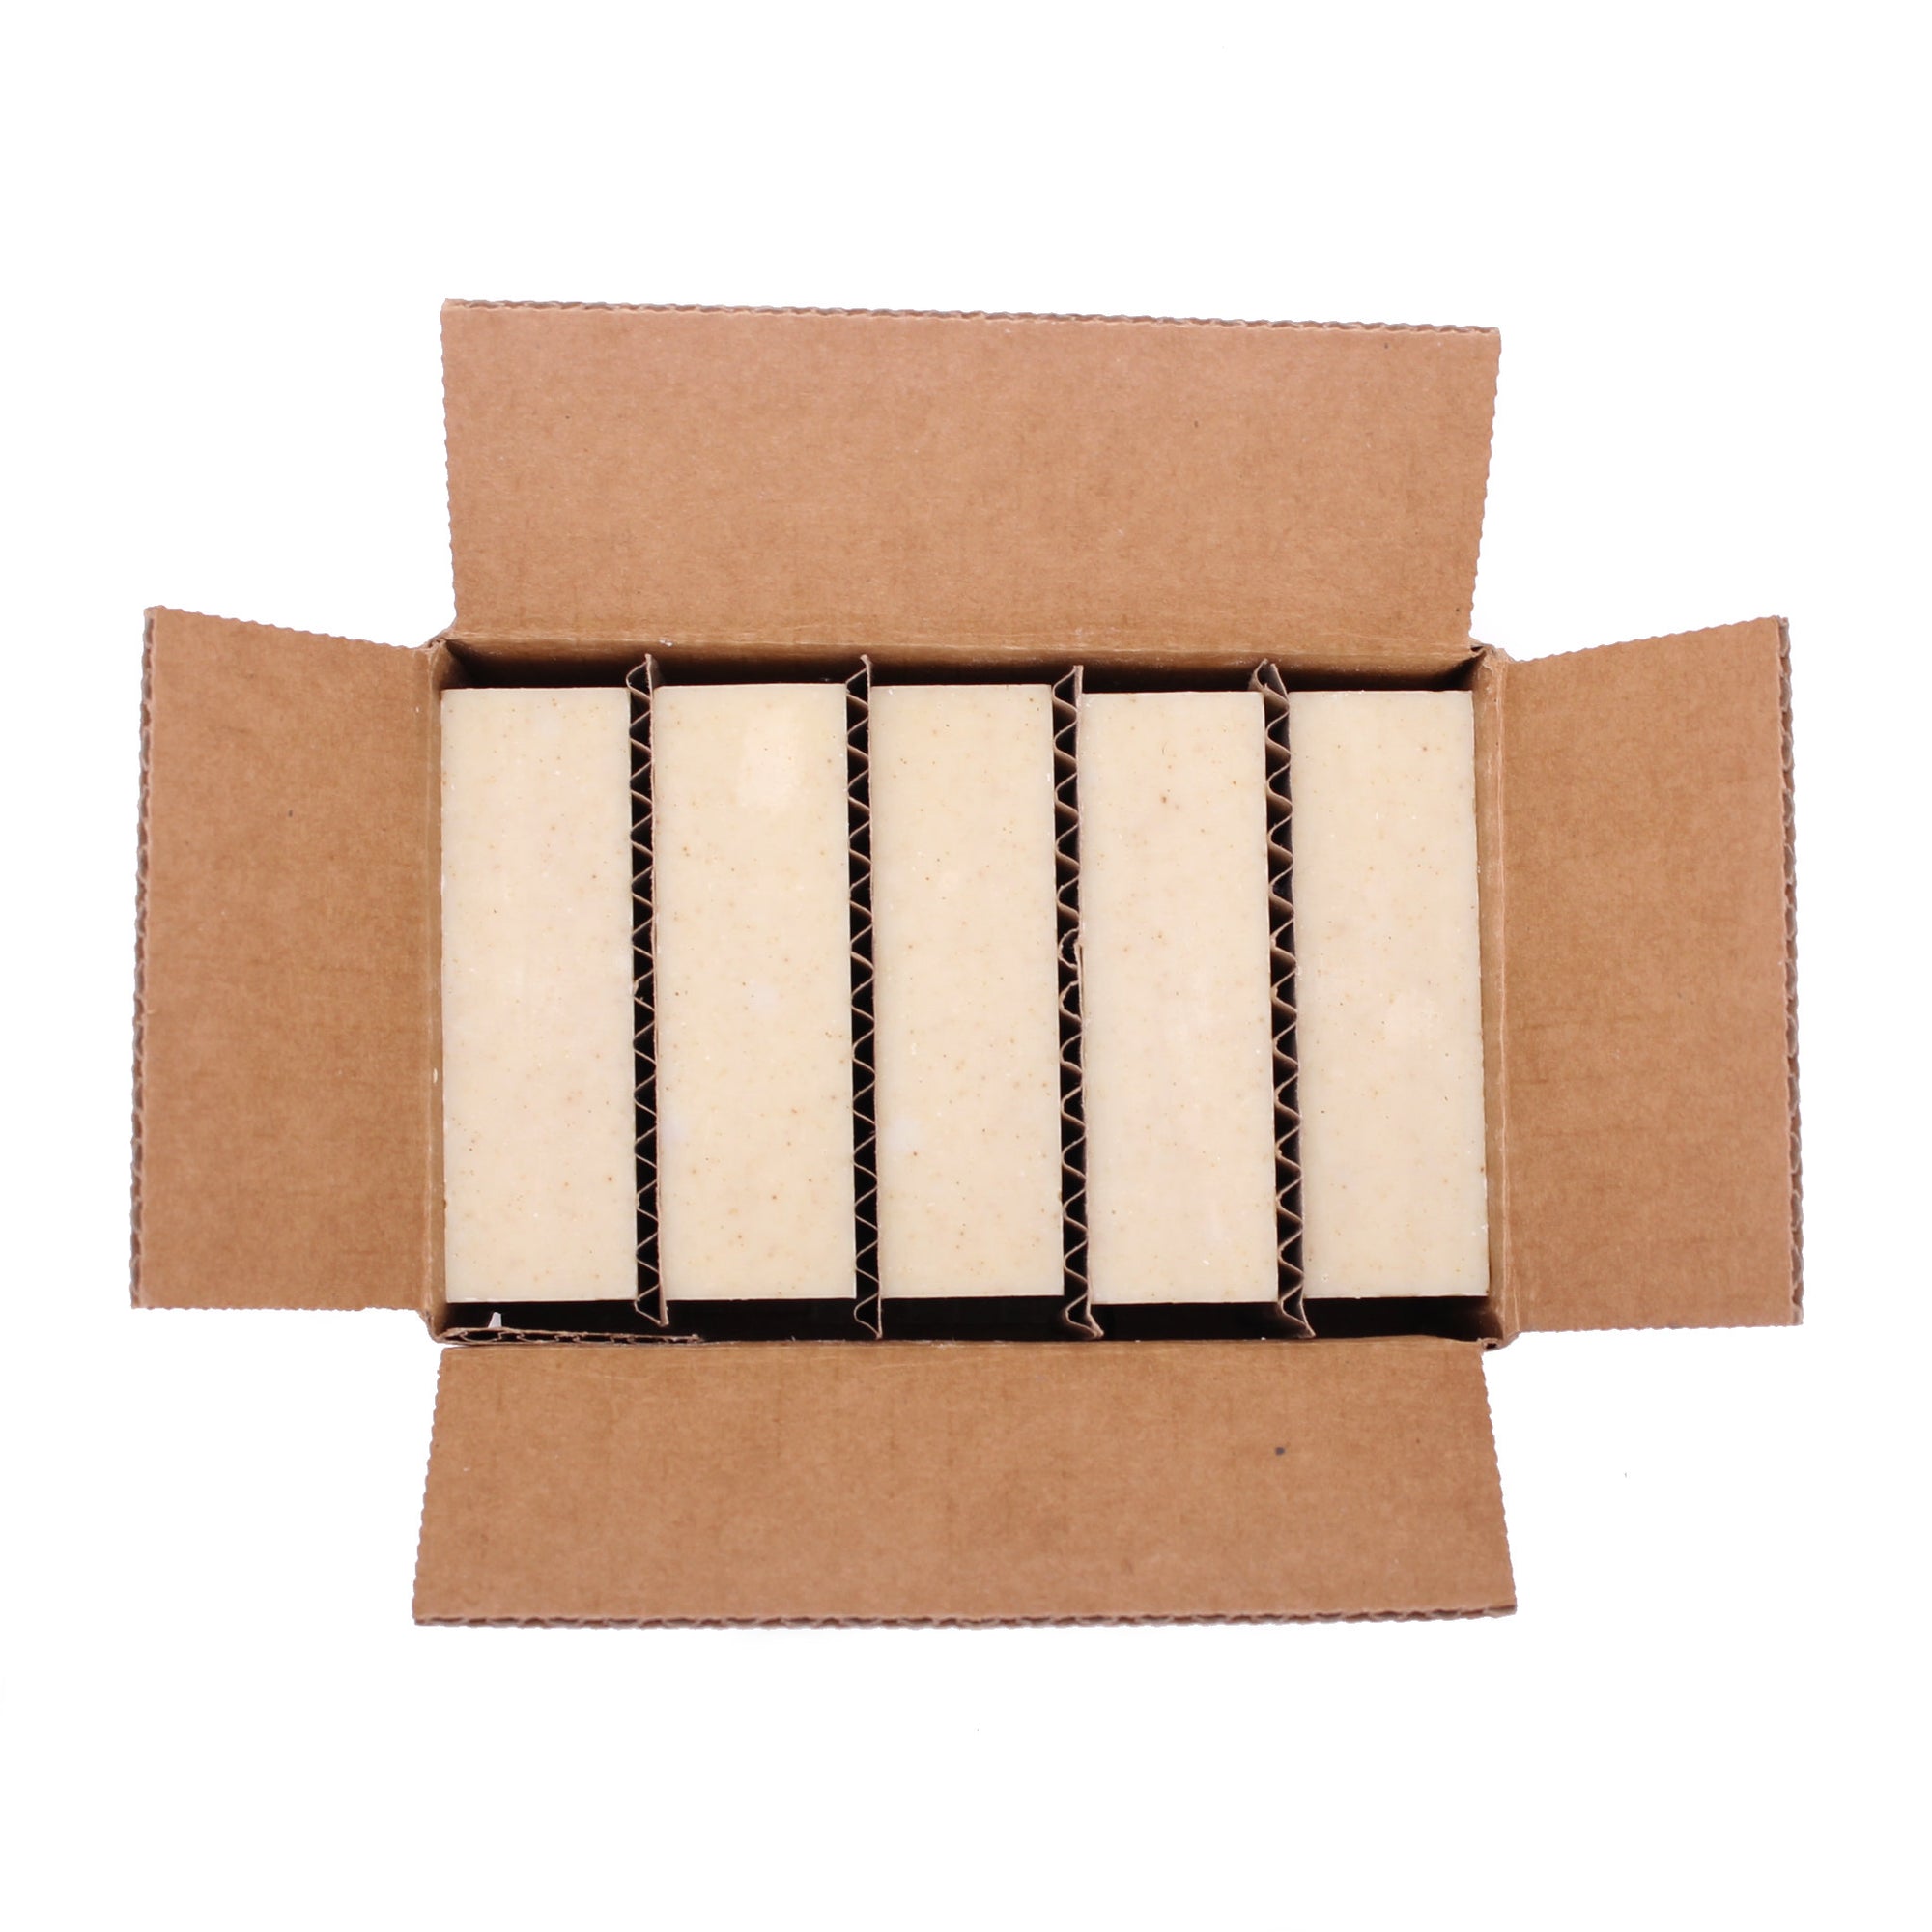 A naked five pack of Plain Jane Unscented organic bar soap from ground Soap in a box.